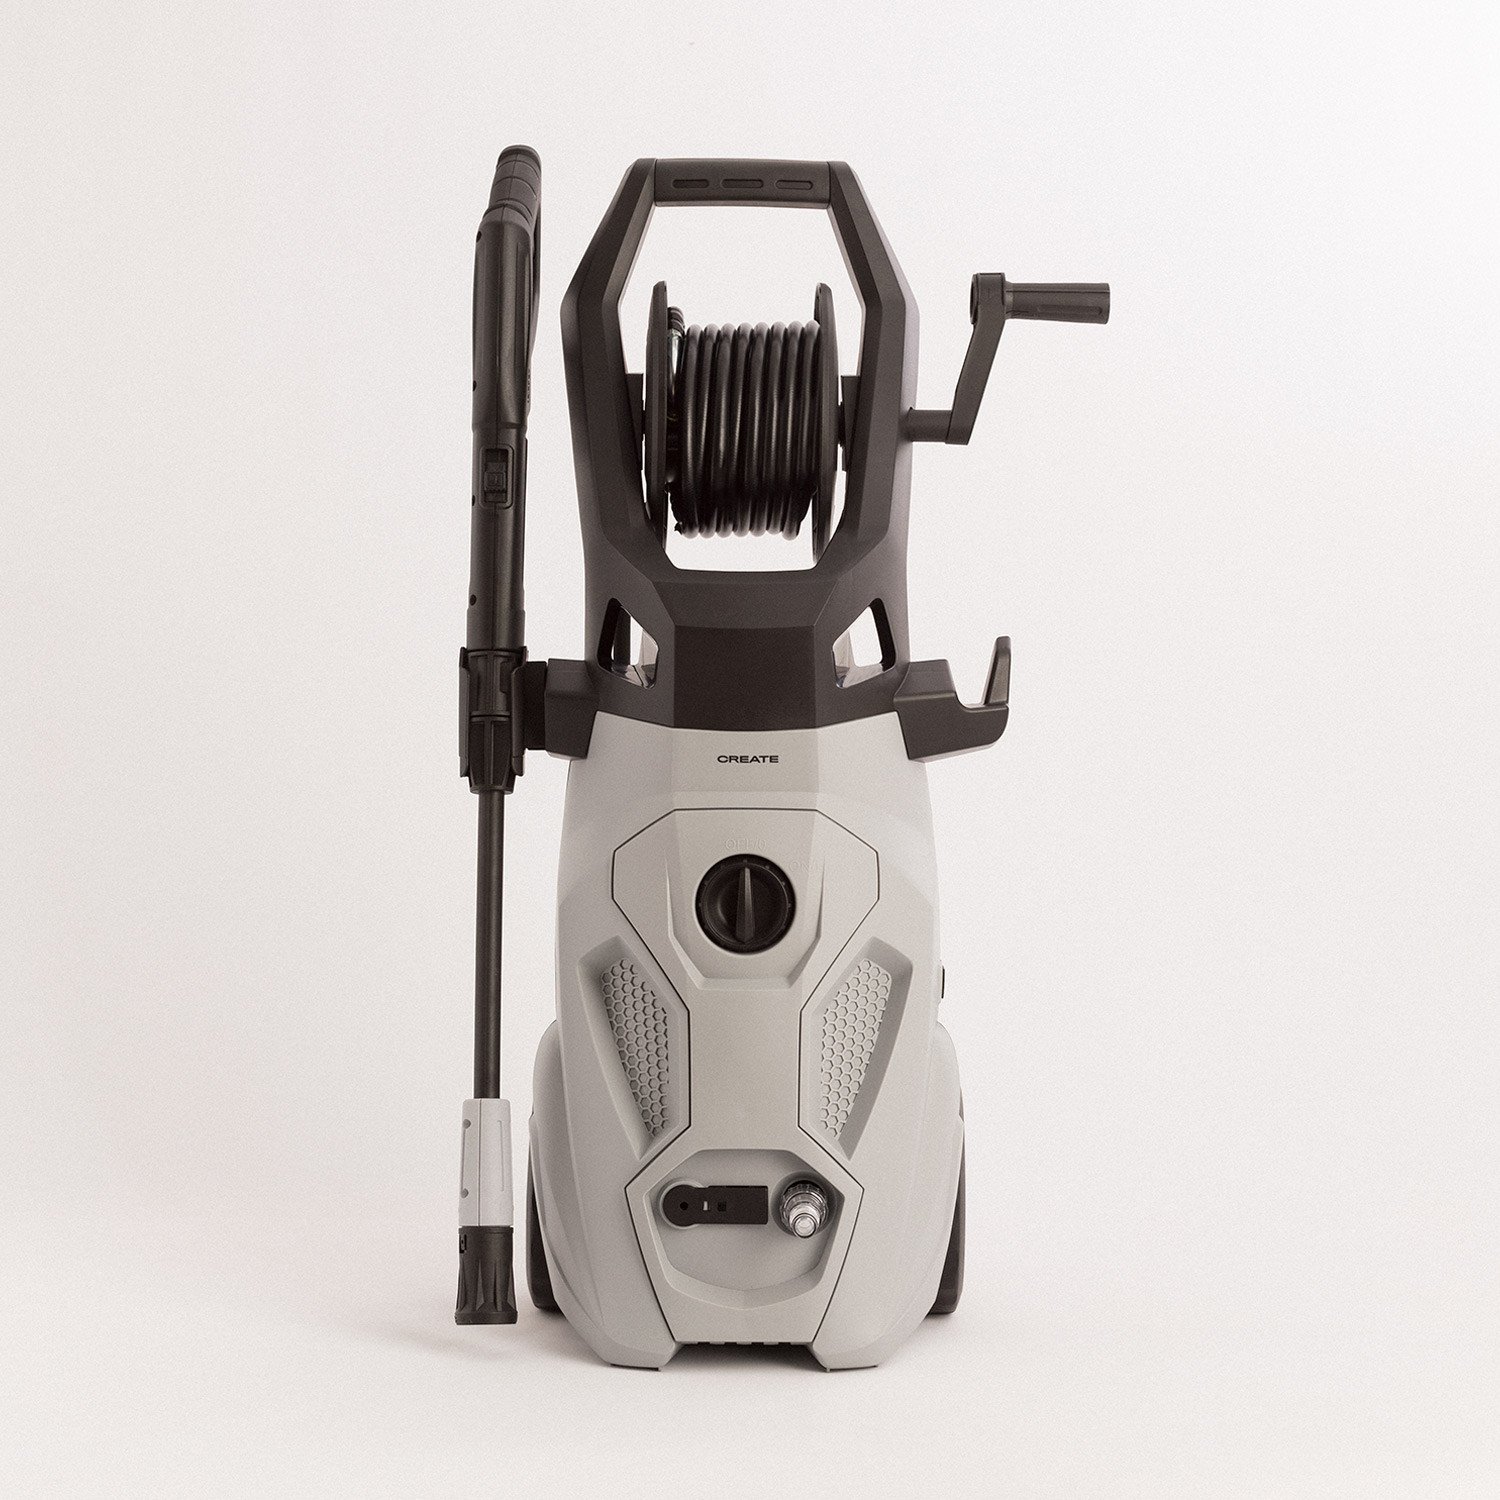 JET WASHER - 2200W High Pressure Washer for outdoors and vehicles, imagen de galería 1